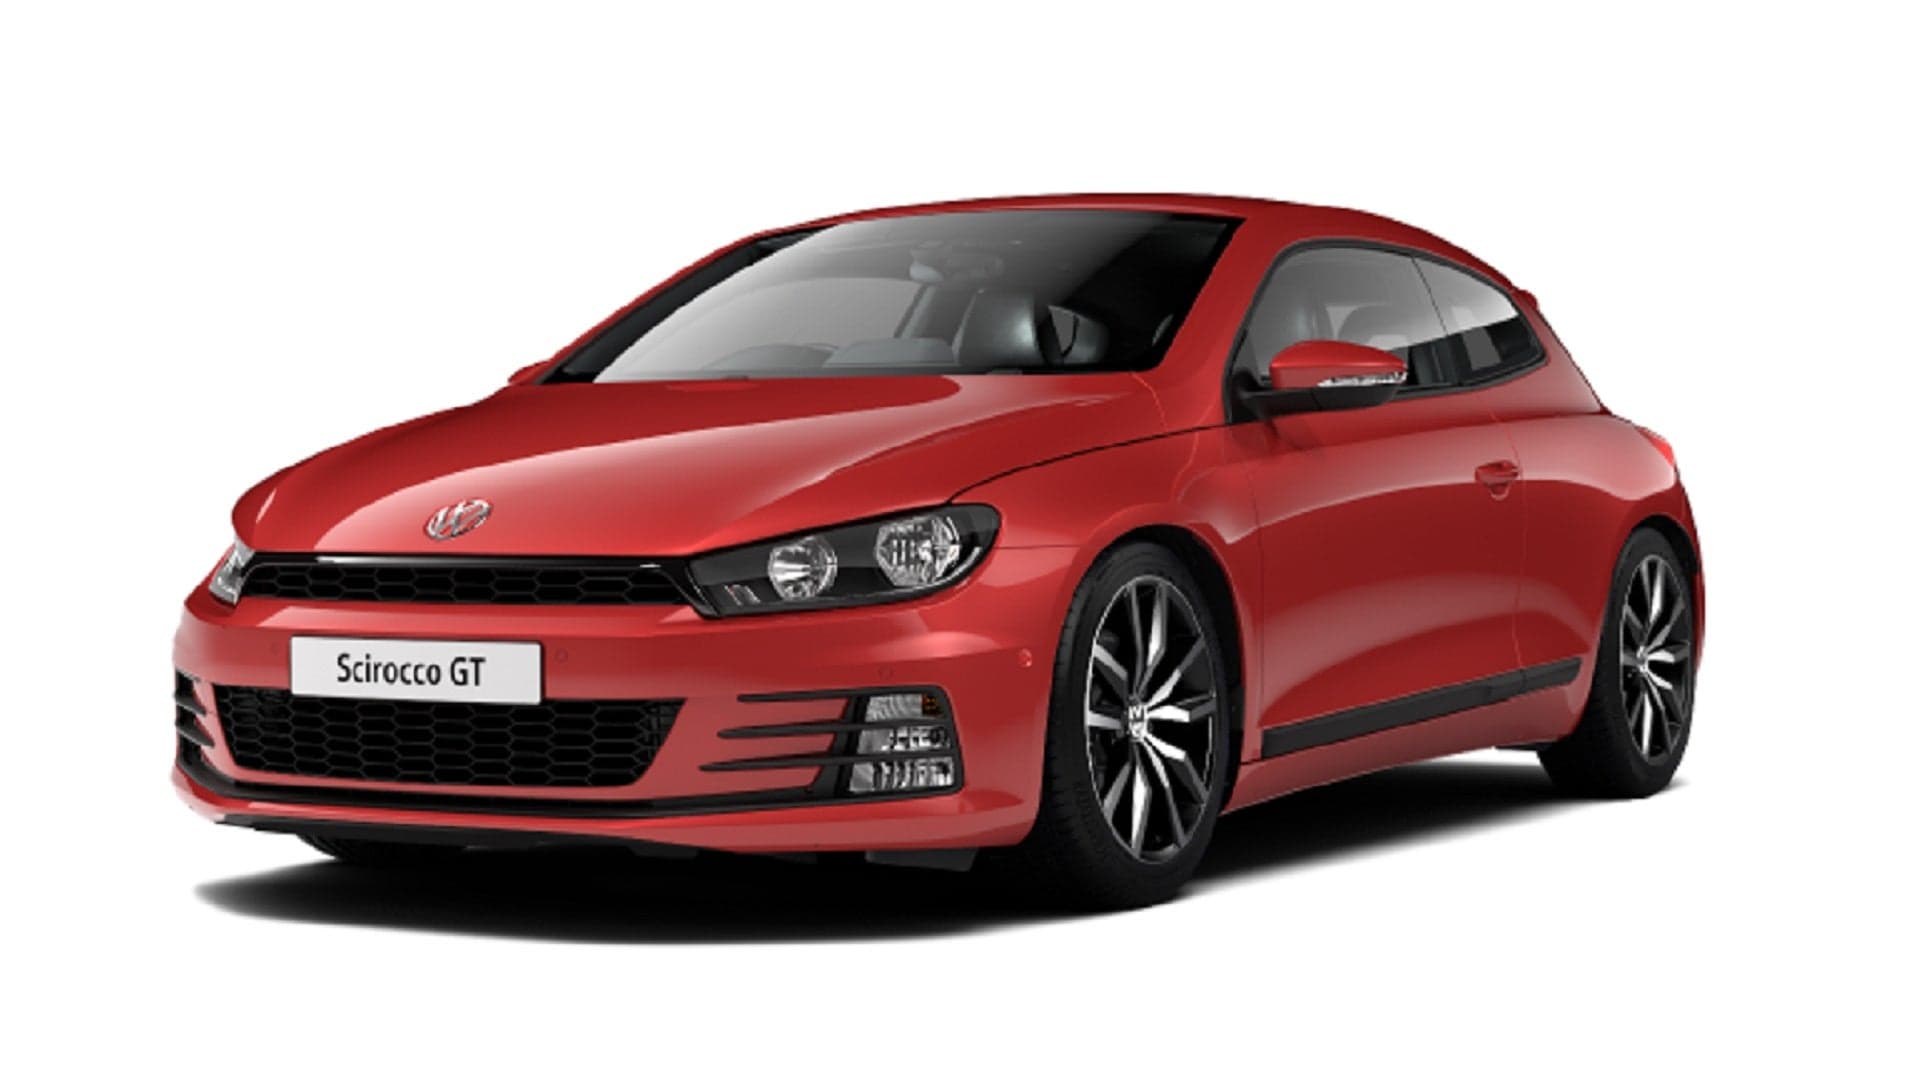 The Next VW Scirocco Will Be an Electric Car